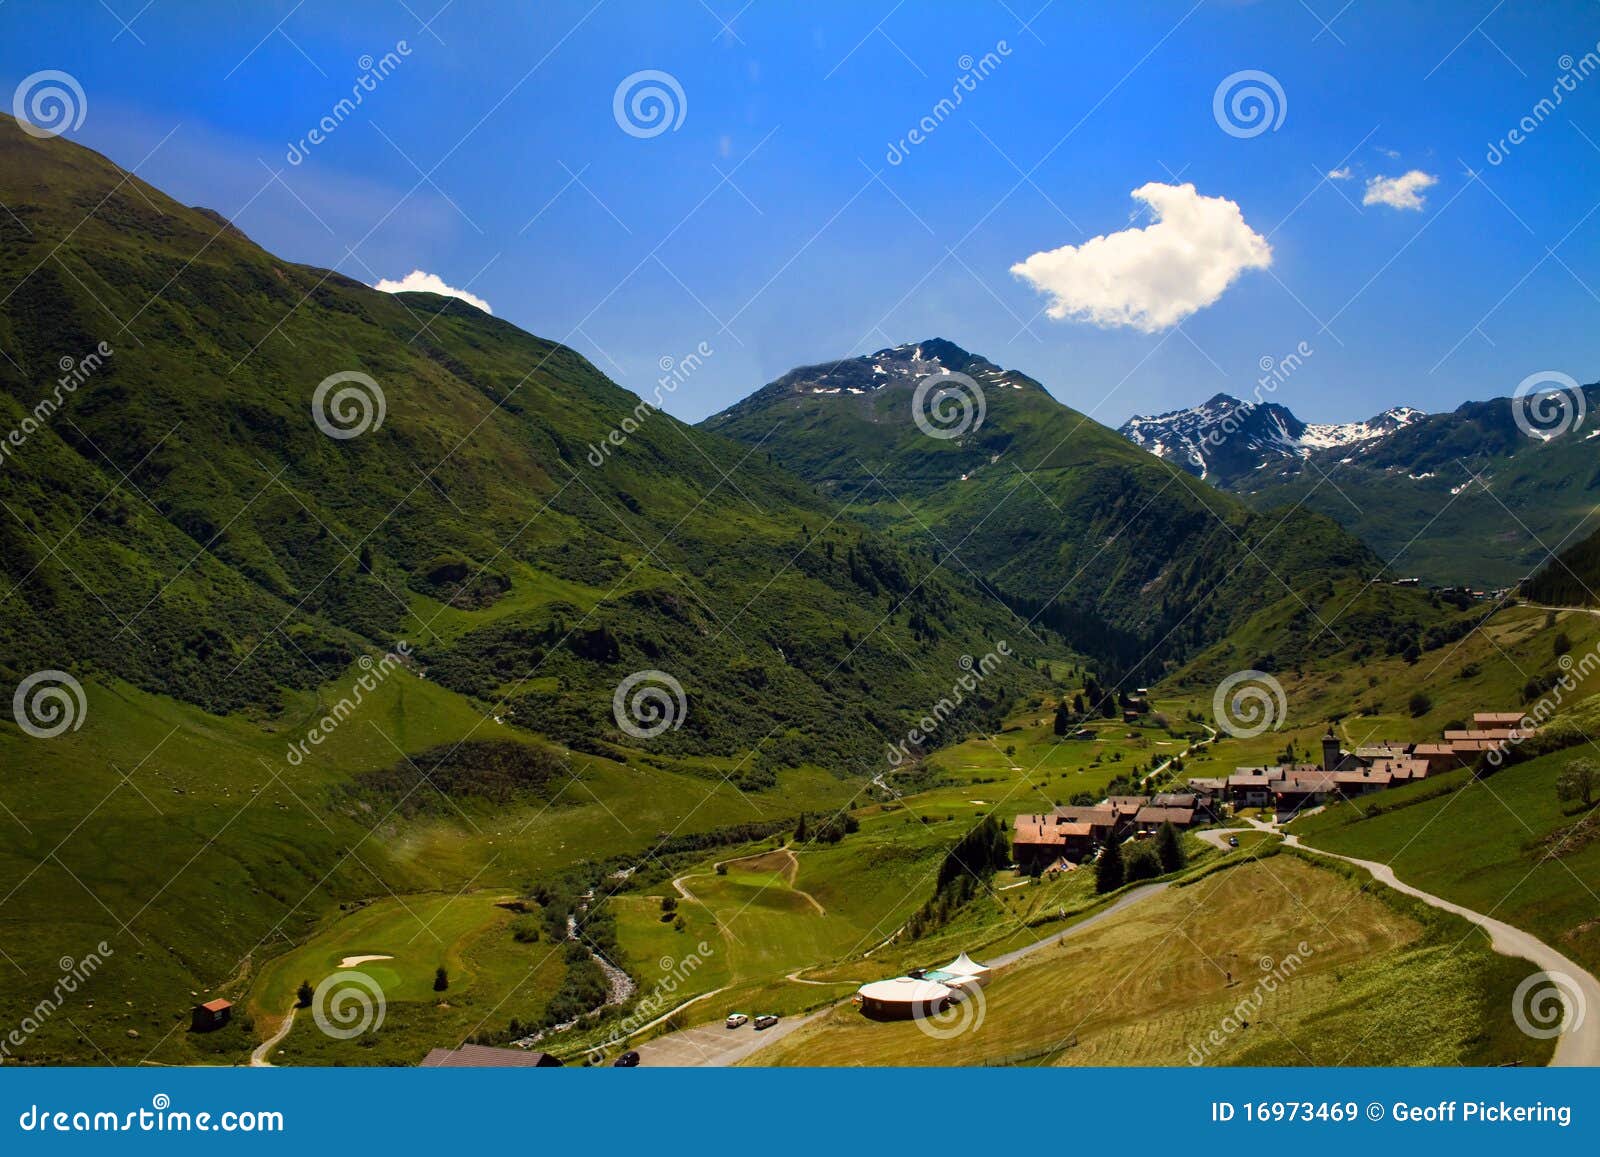 View of the scenery in the mountains of Switzerland.